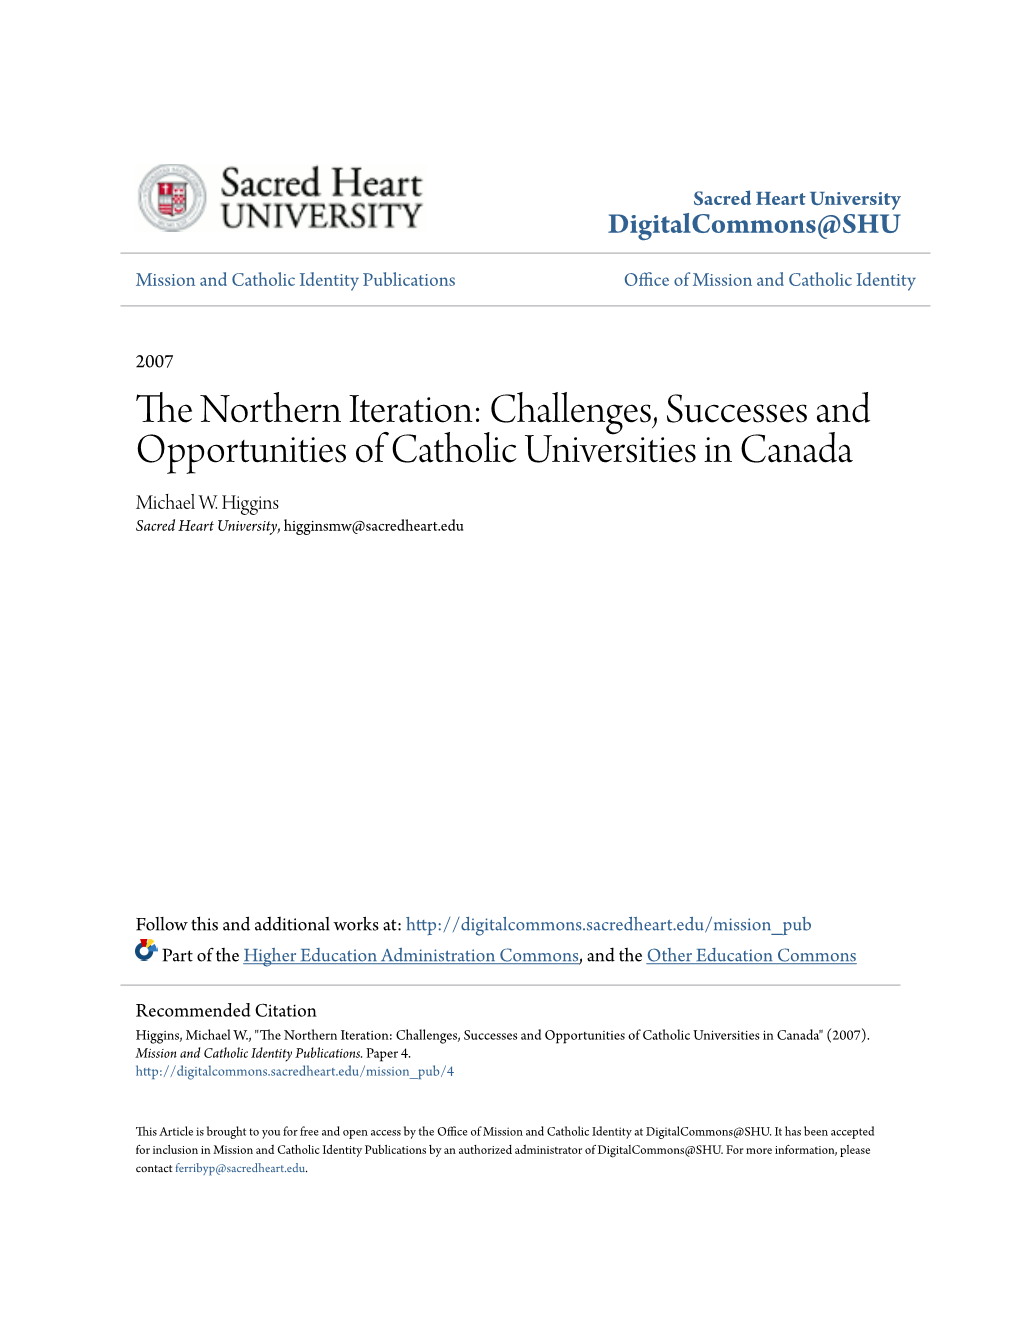 Challenges, Successes and Opportunities of Catholic Universities in Canada Michael W